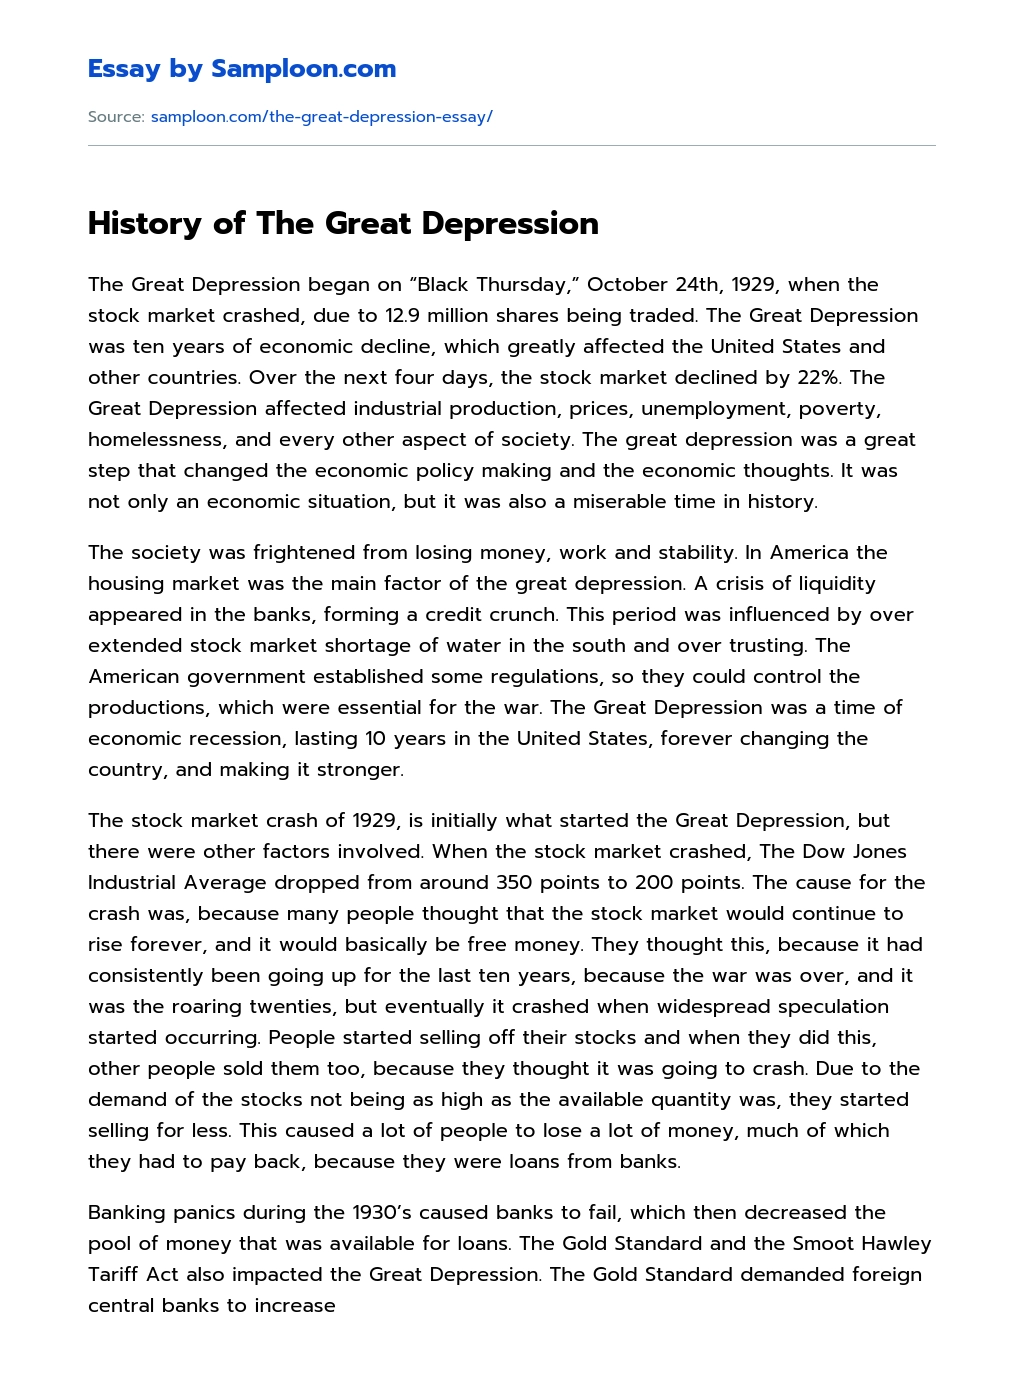 History of The Great Depression essay